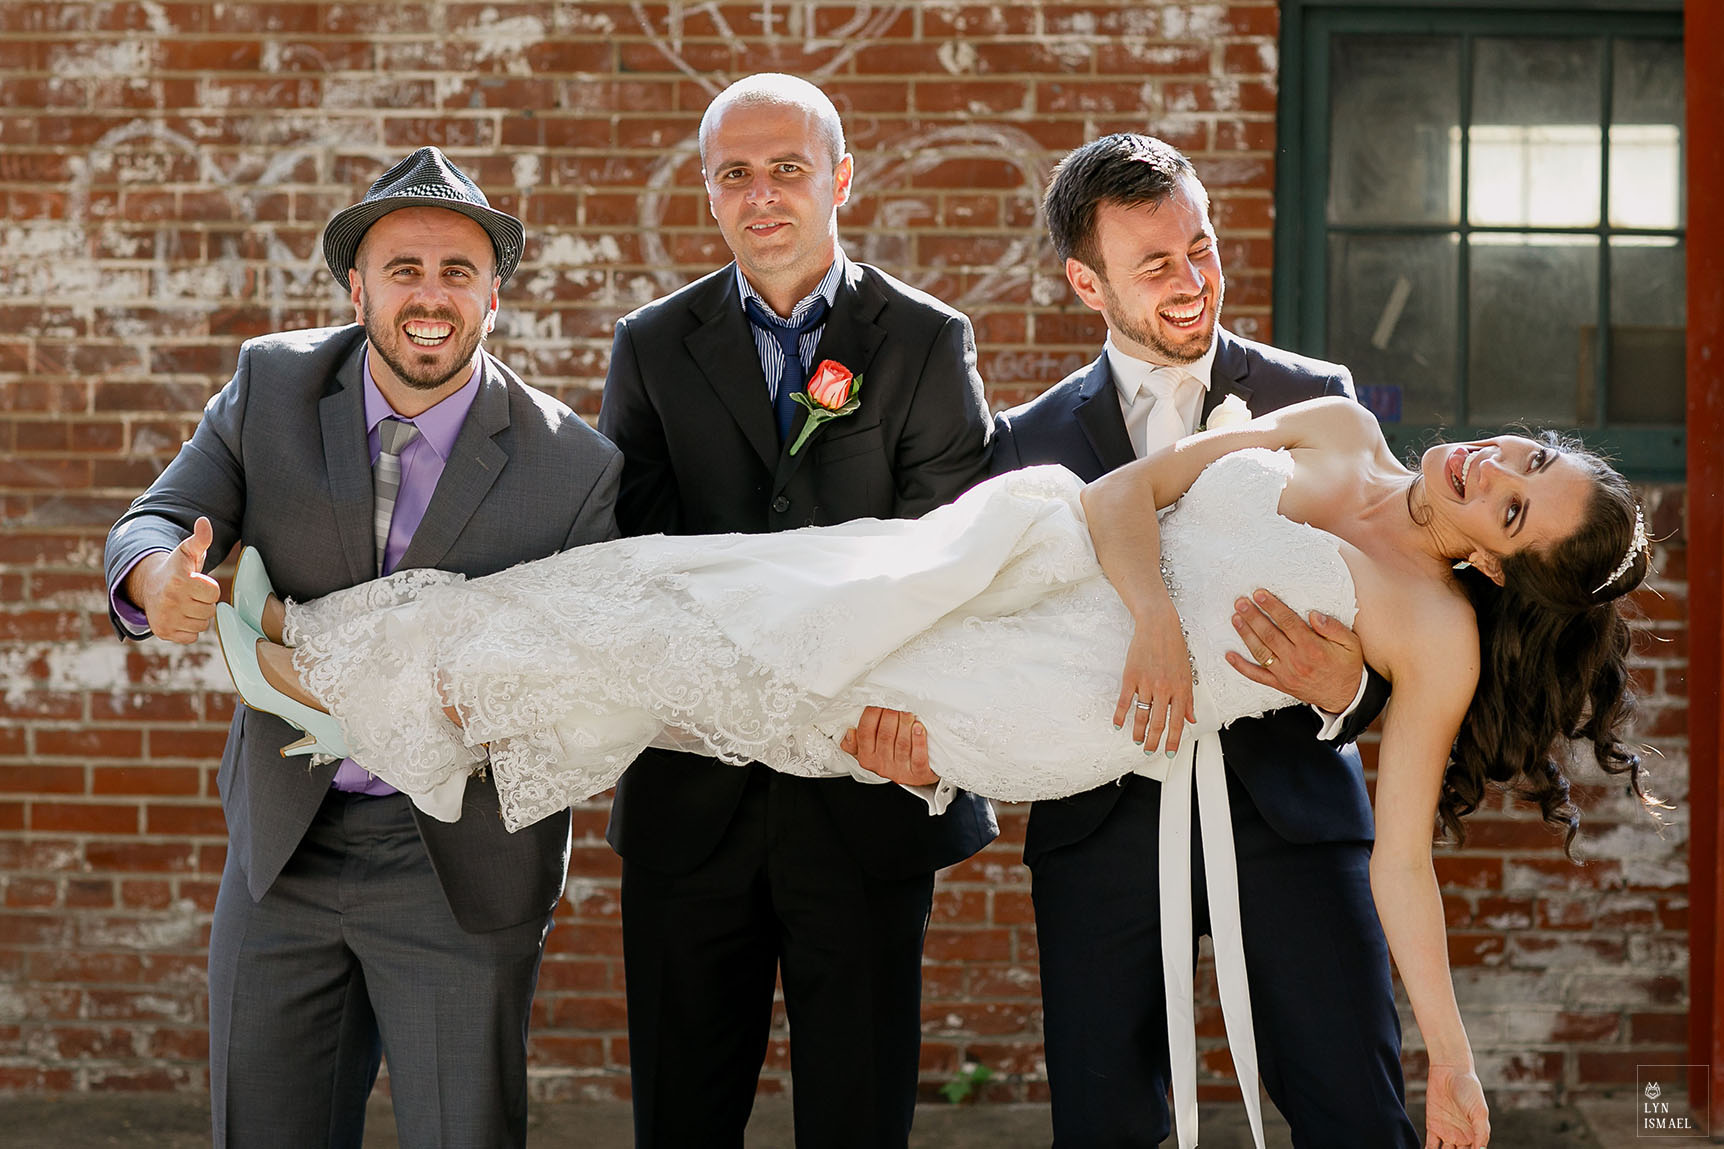 Bride and groom make fun of themselves with the wedding party